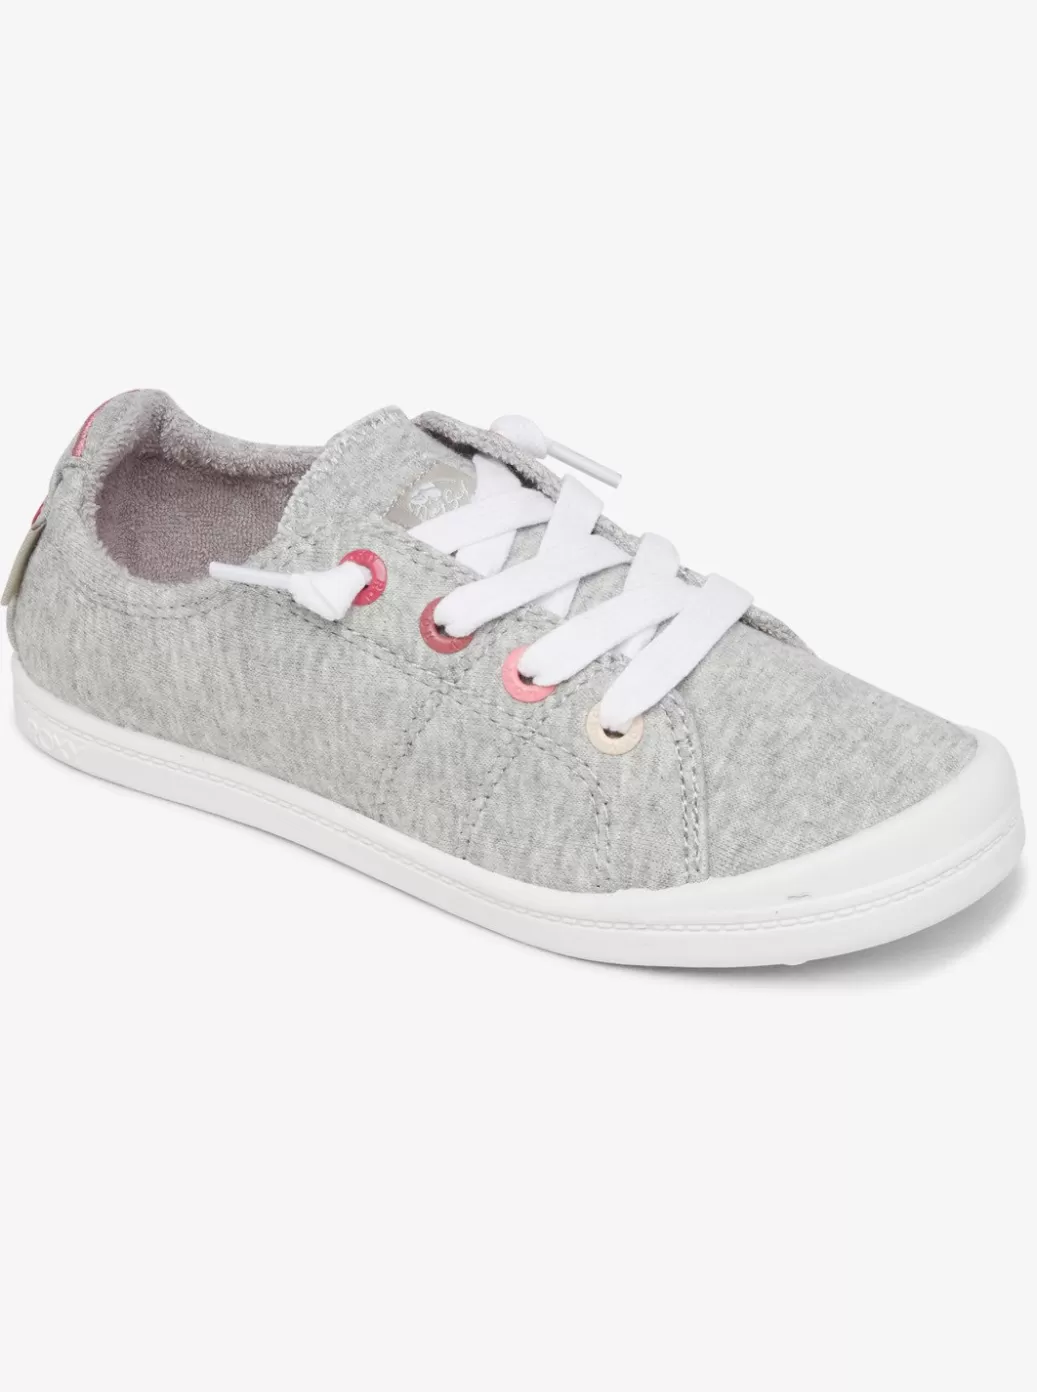 Shoes & Sandals | KIDS ROXY Girl's 4-16 Bayshore Slip-On Shoes Grey Heather